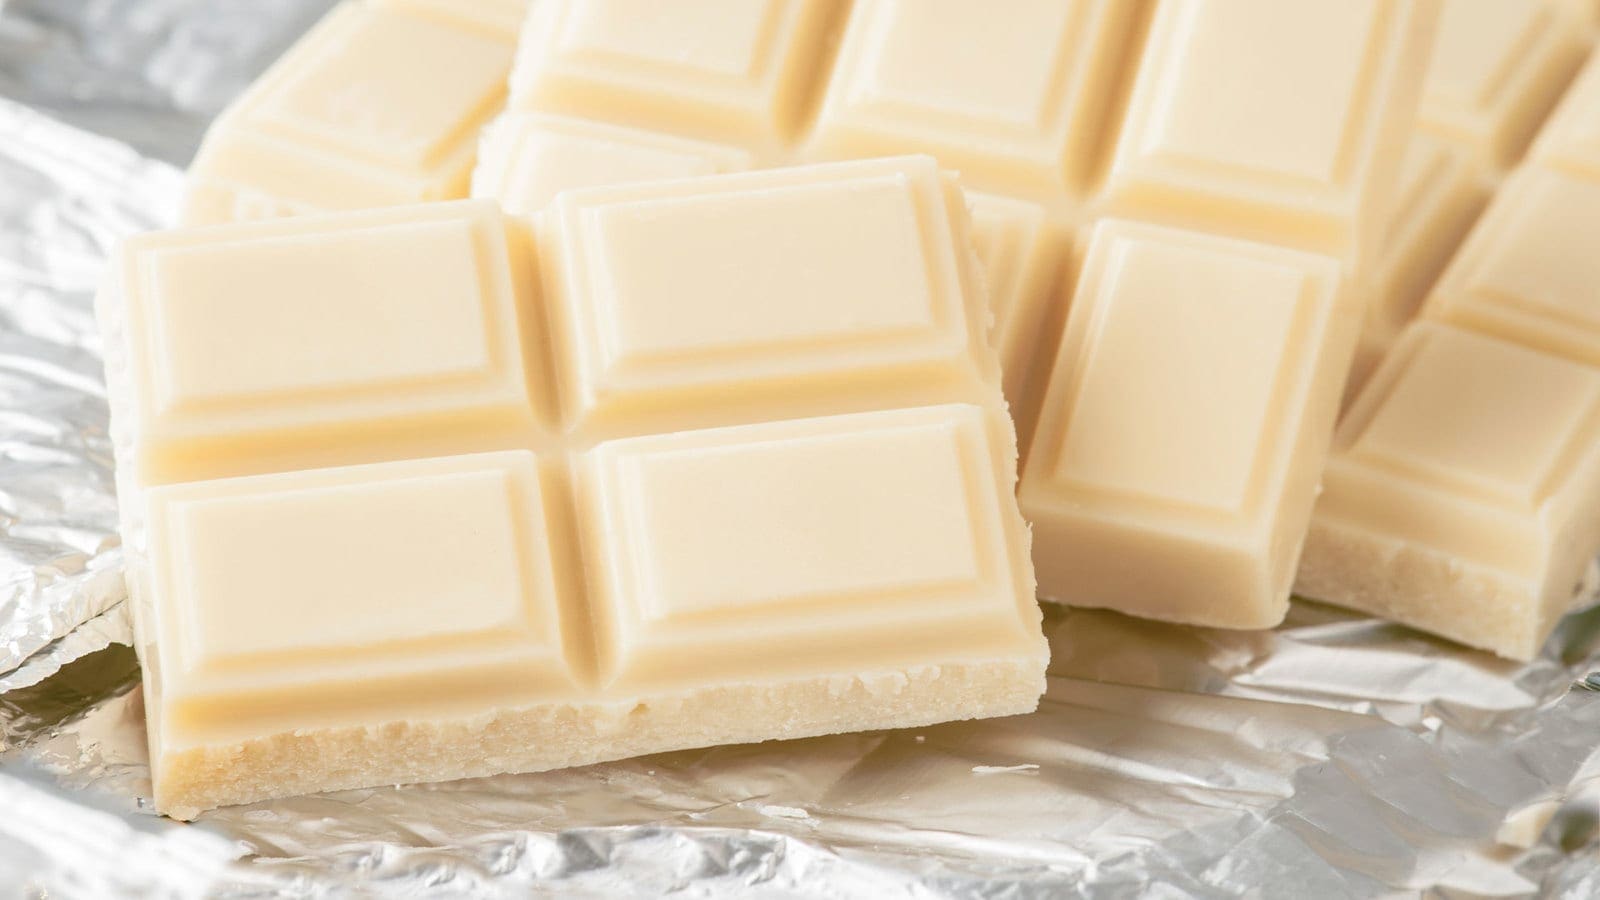 KitKat maker Nestlé invests in white chocolate production in Italy